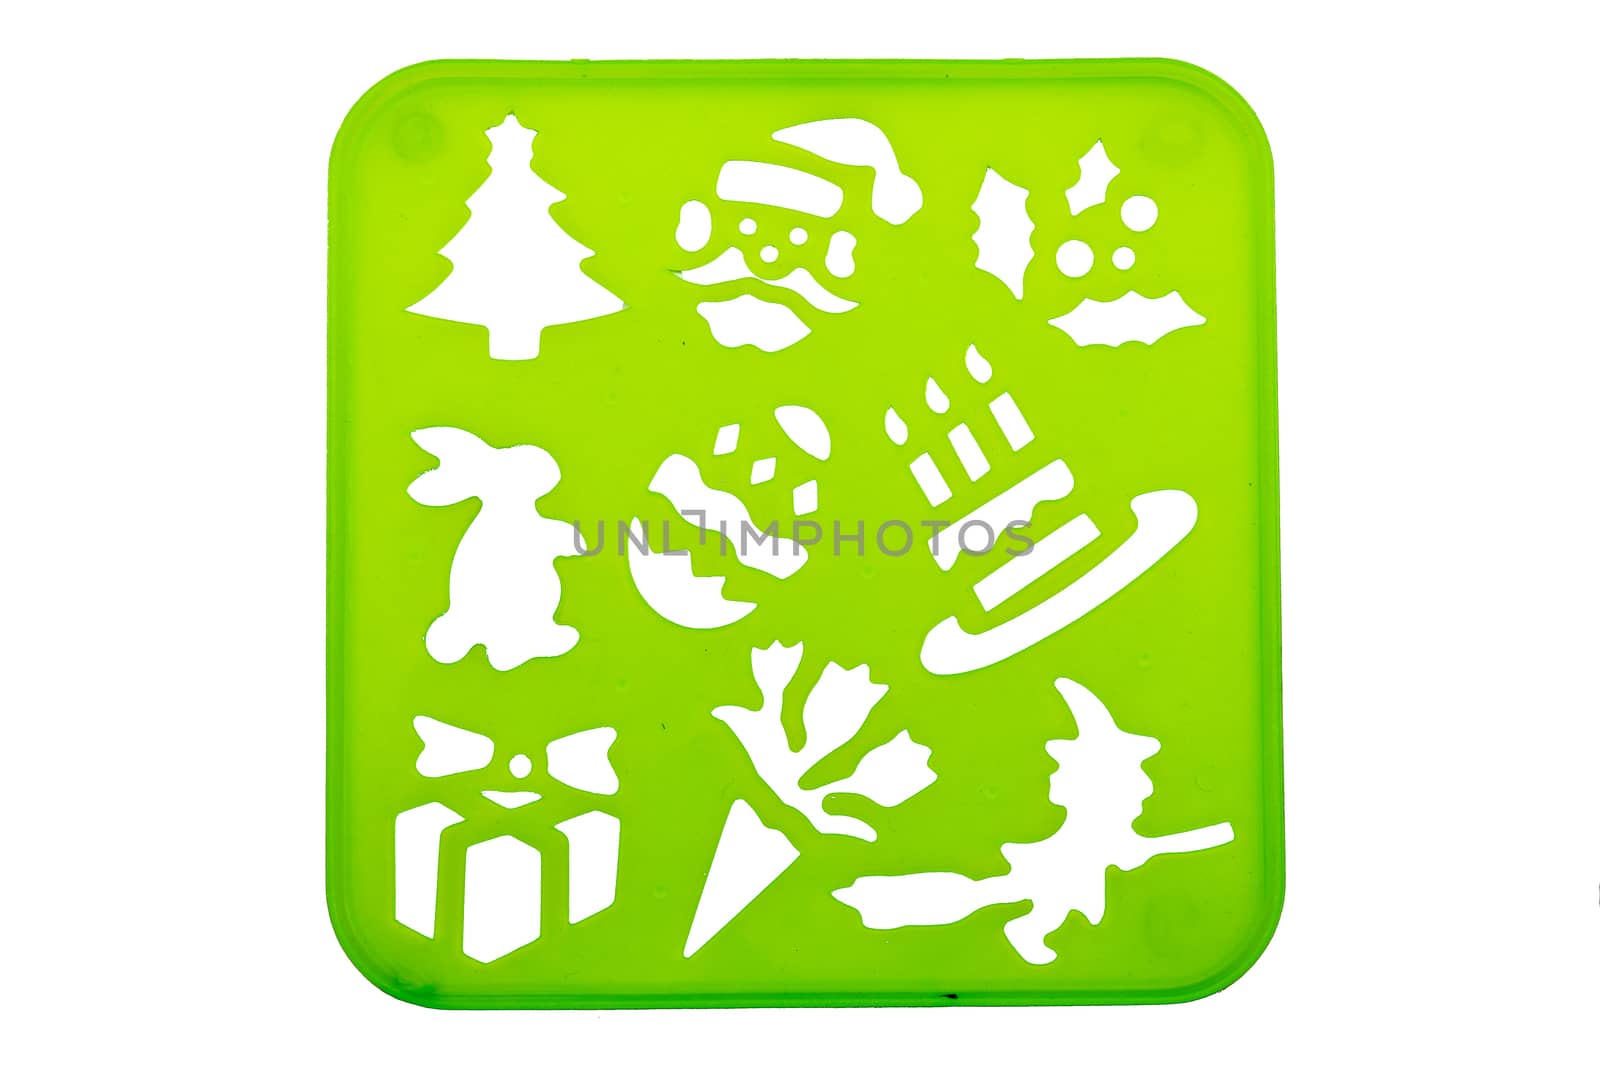 Holiday stencil shapes on a green background